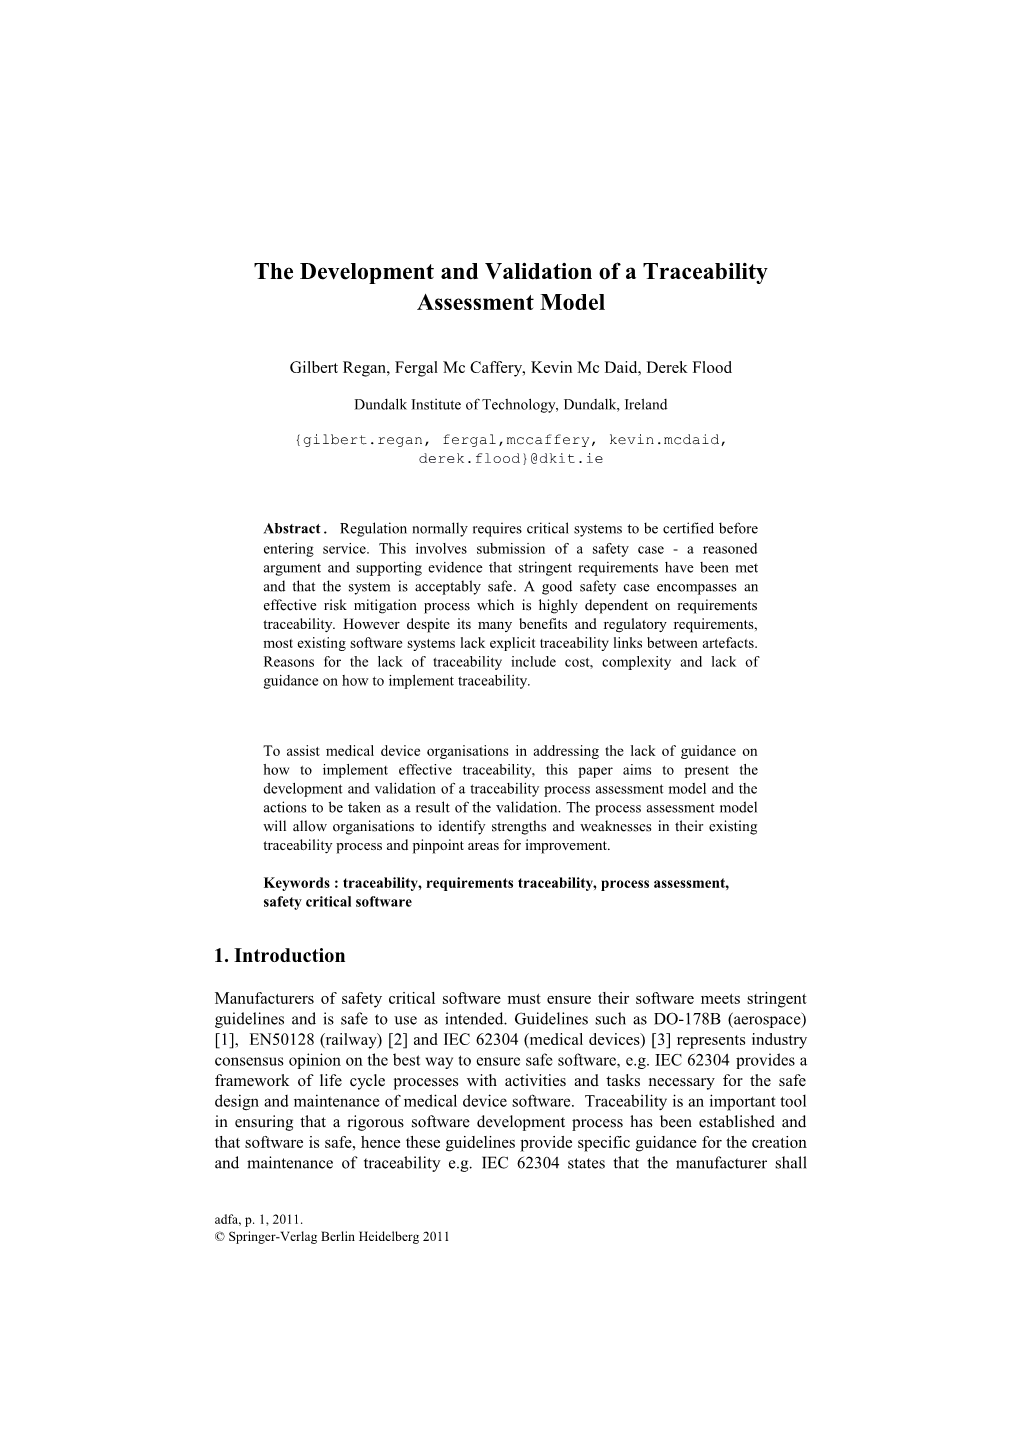 The Development and Validation of a Traceability Assessment Model